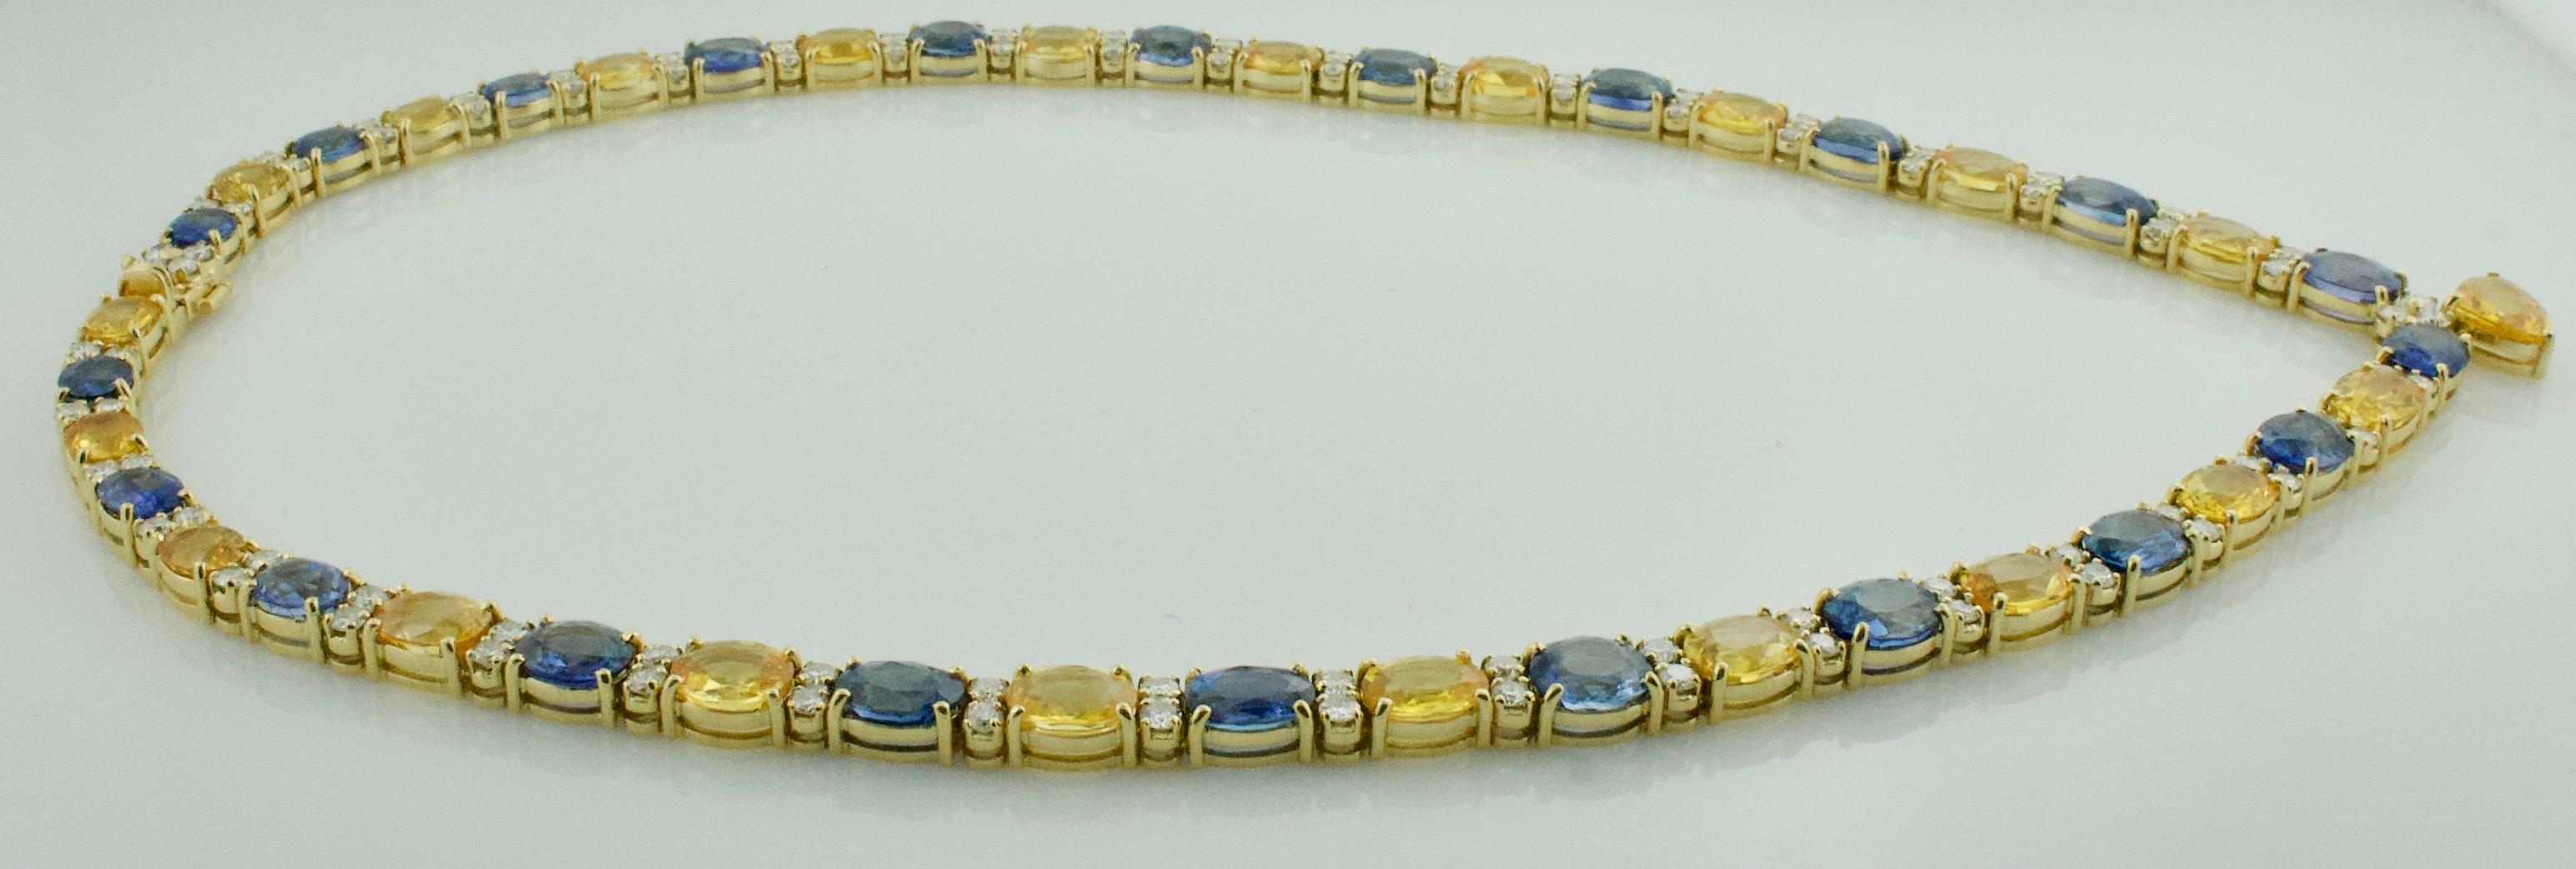 Multi Colored Sapphire and Diamond Necklace in 18k Yellow Gold 53.55 Carats For Sale 1